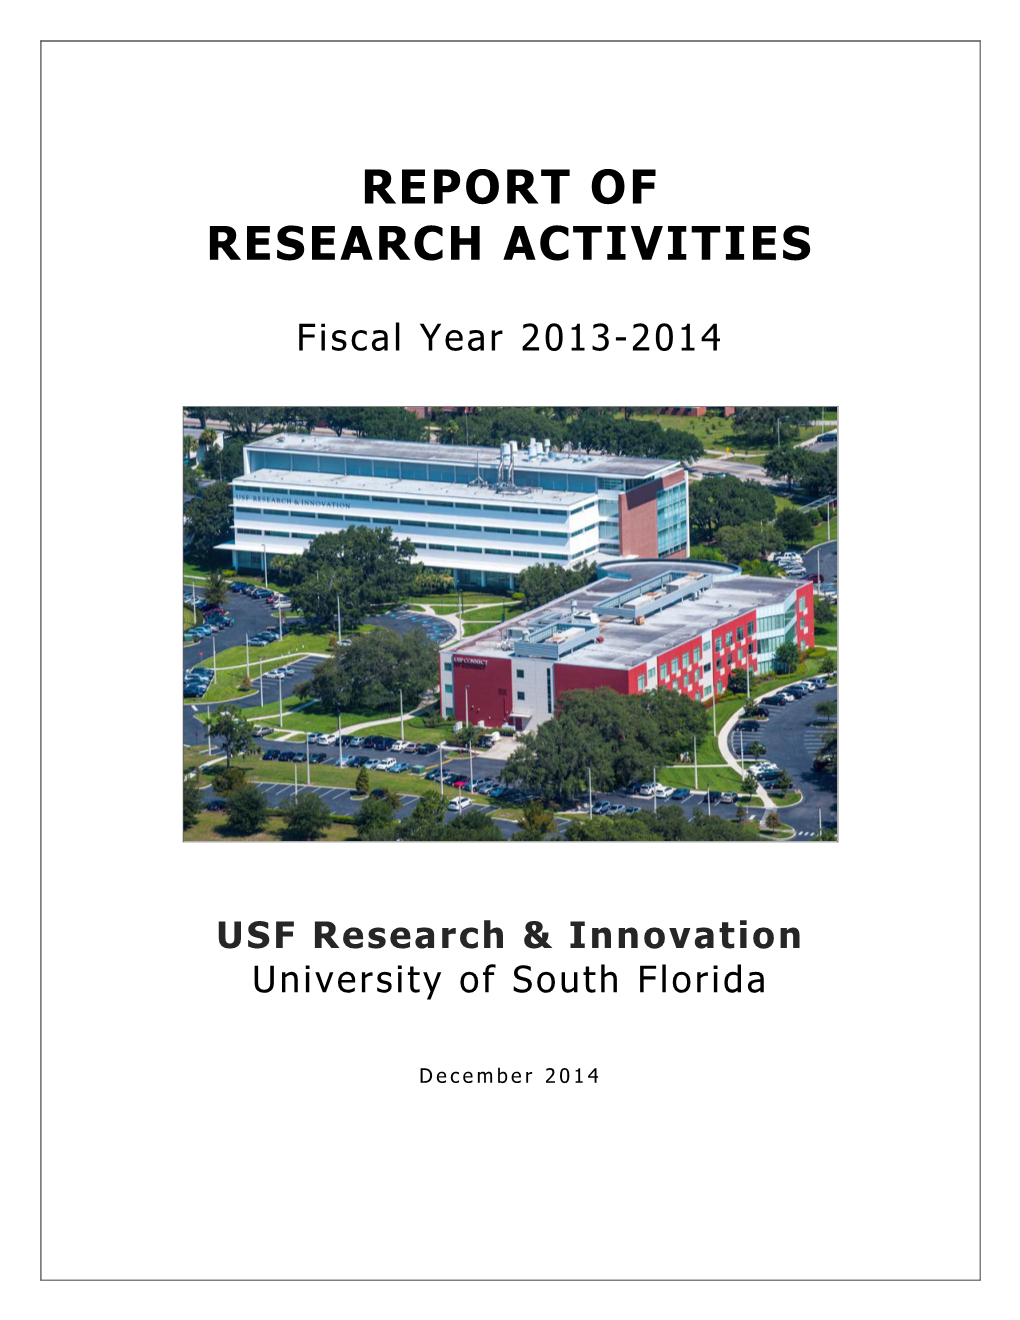 Fiscal Year 2013-2014